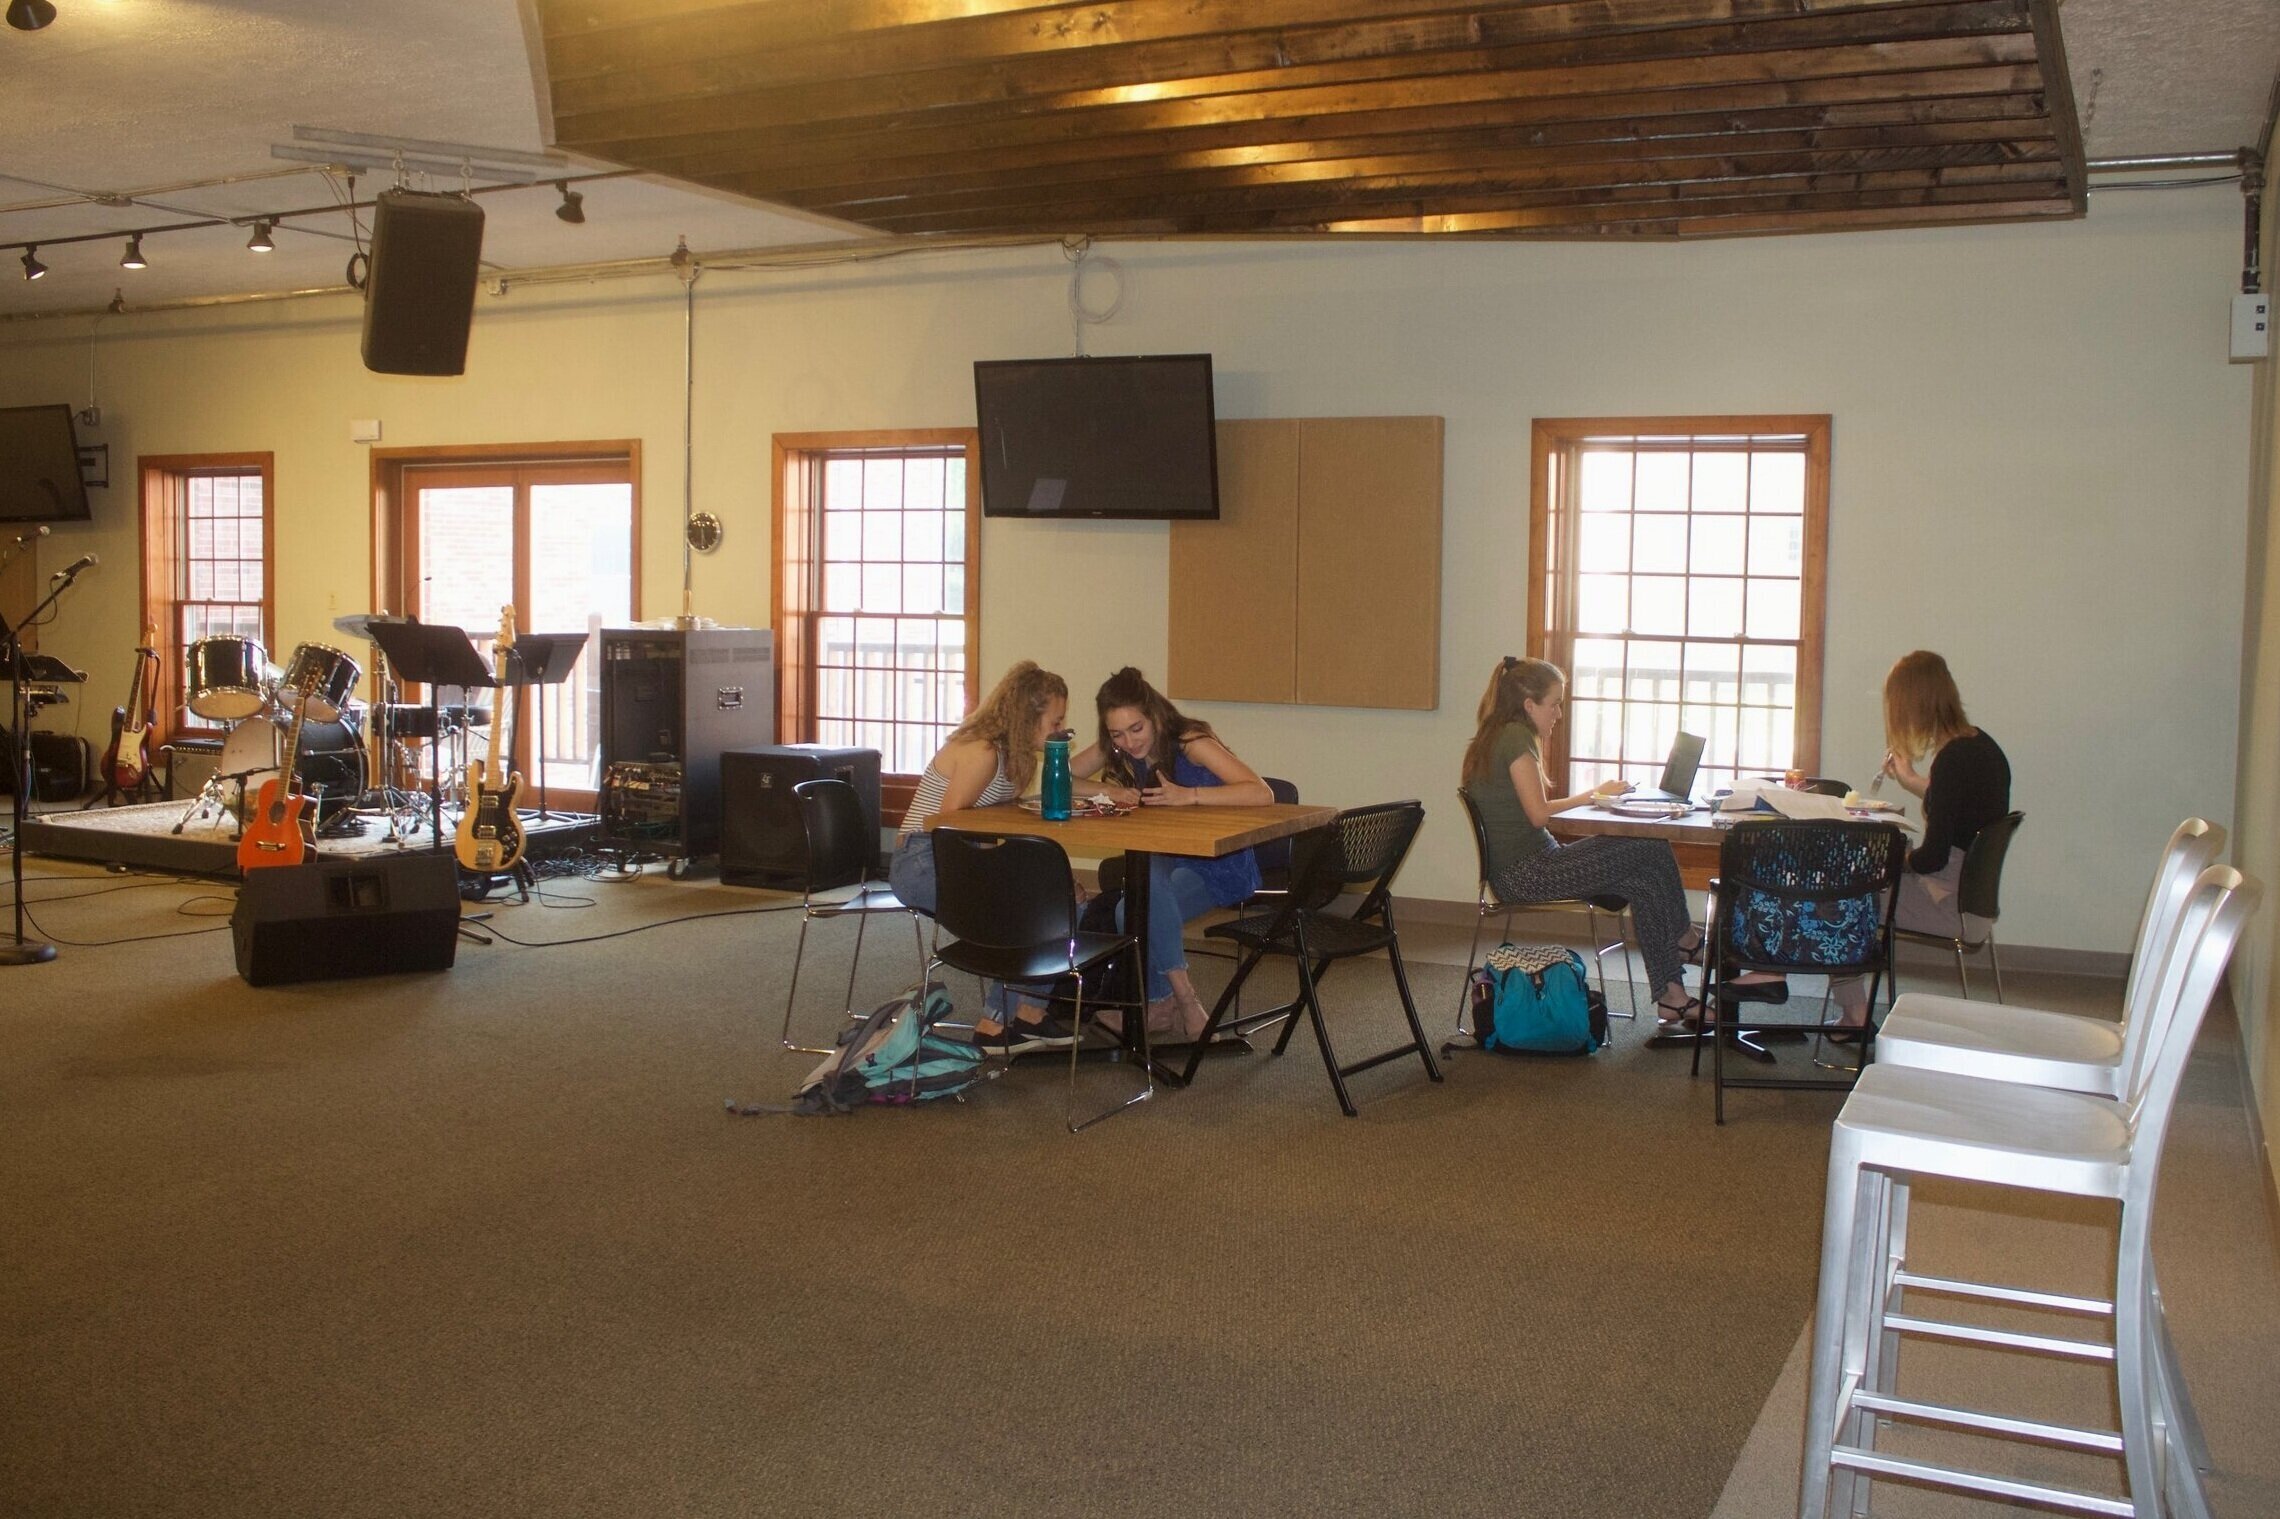 Students Studying in Great Room